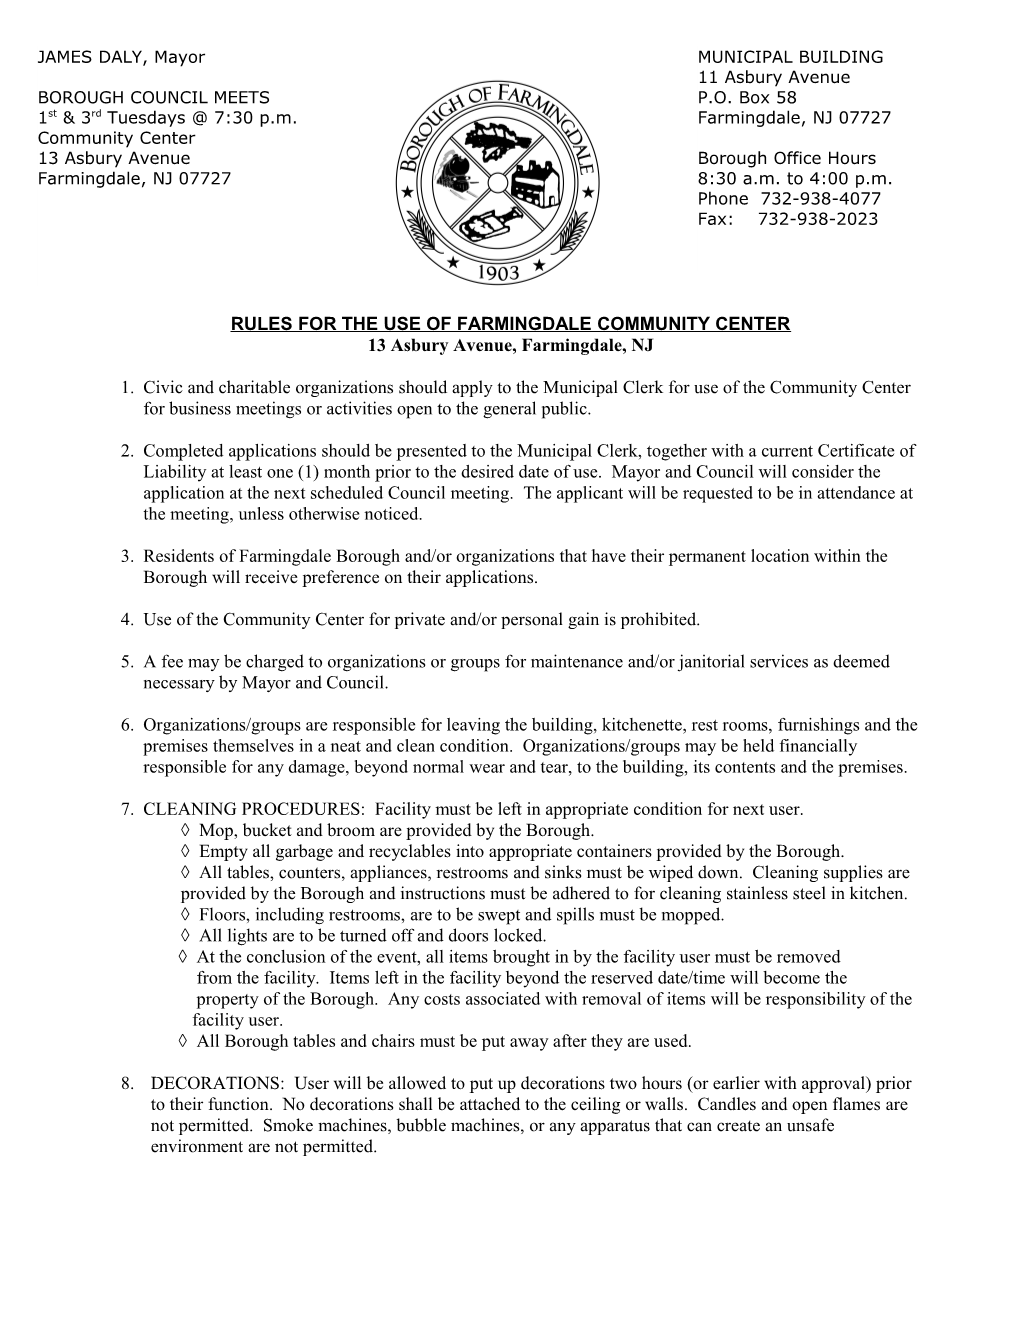 Rules for the Use of Farmingdalecommunity Center